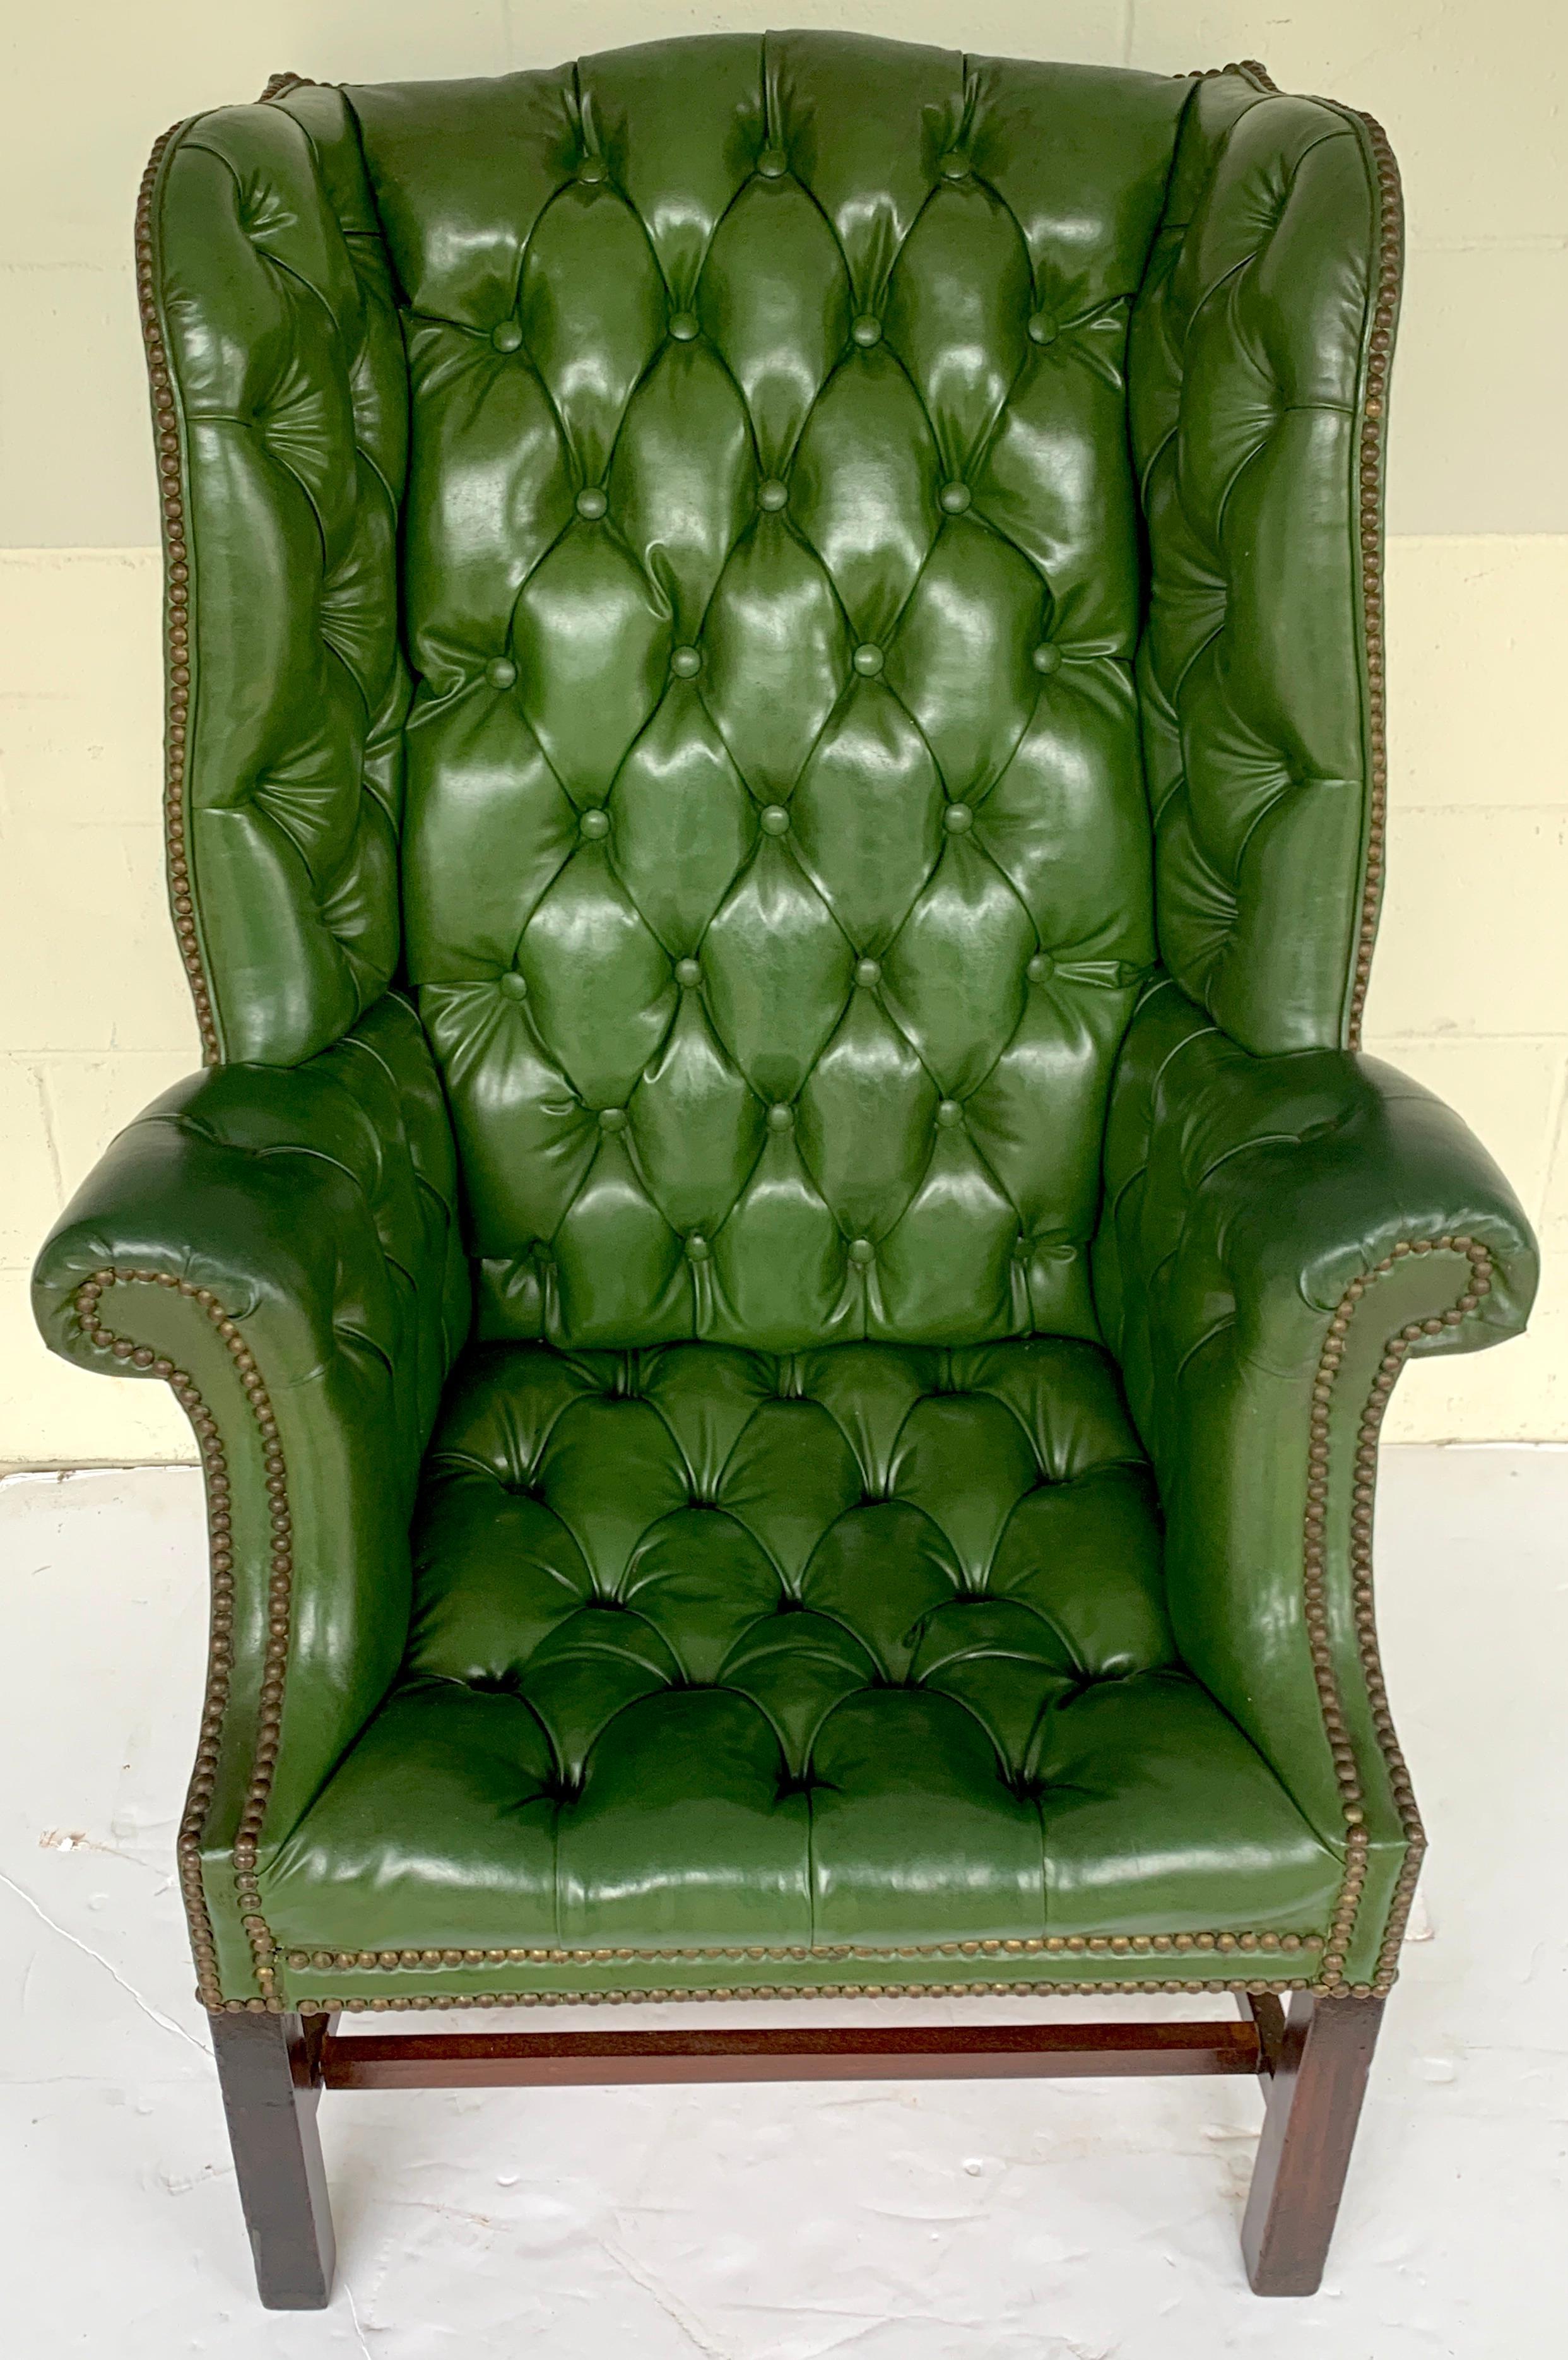 Exquisite George III mahogany green leather chesterfield wing chair, old world proportions, with tall back and generous rolled arms supported on an exterior mahogany stretcher. The seat measures 19